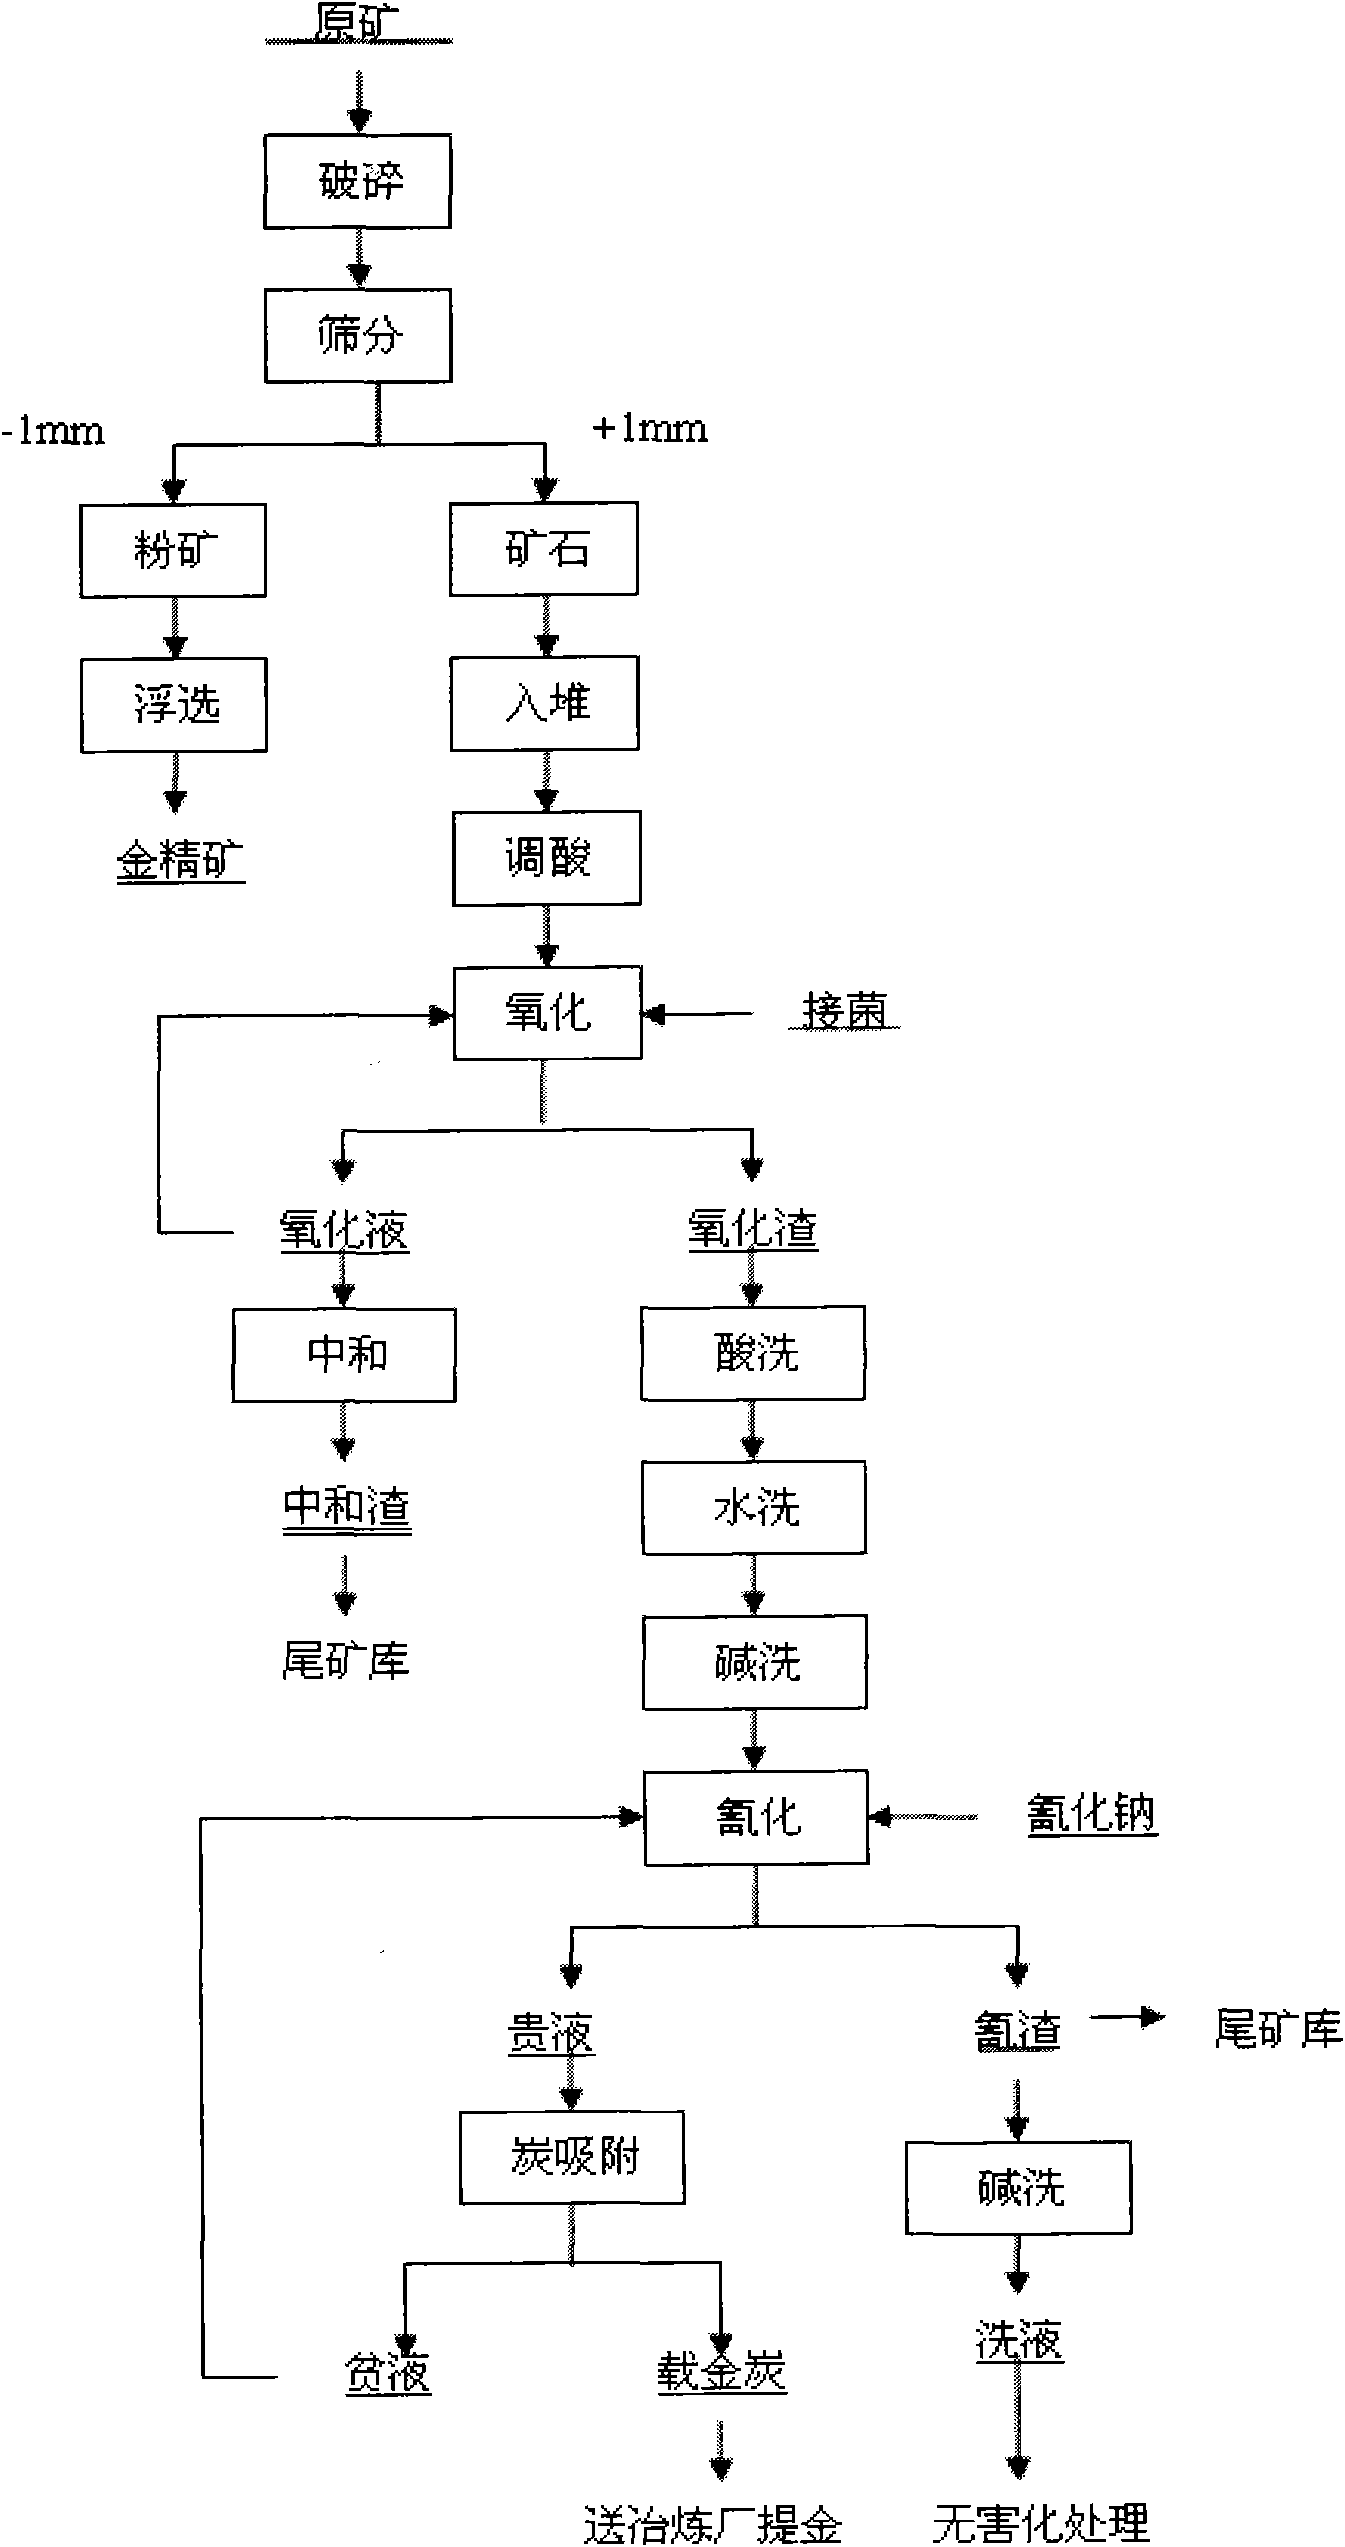 Process for extracting gold from low-grade difficultly-treatable gold ore containing arsenic and carbon